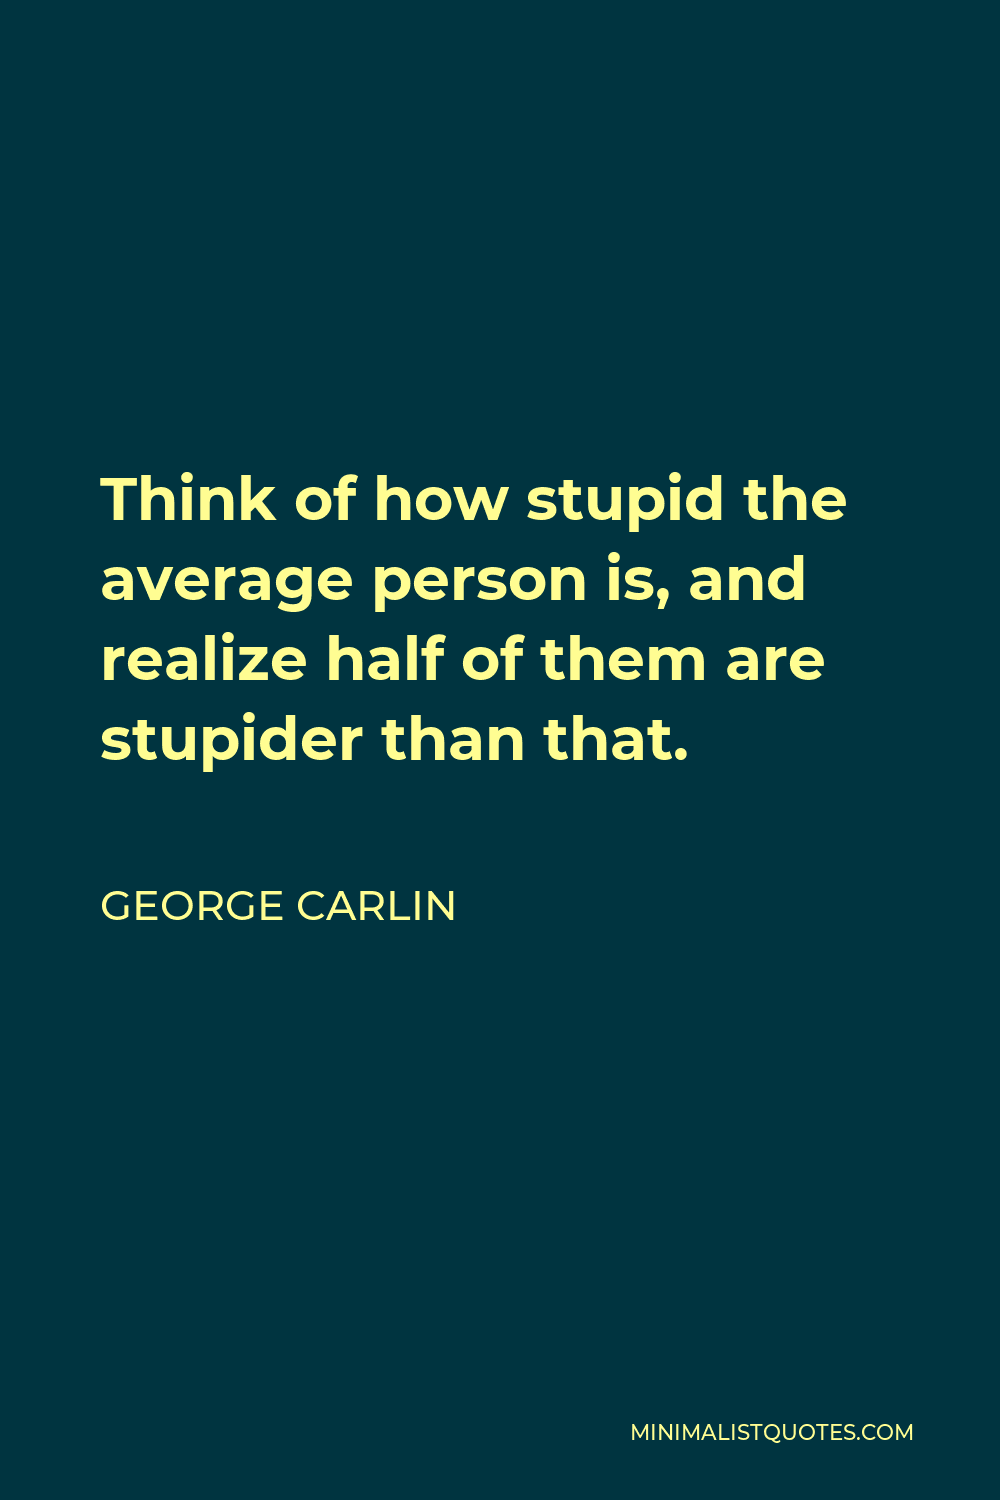 George Carlin Quote - Think of how stupid the average person is, and realize half of them are stupider than that.